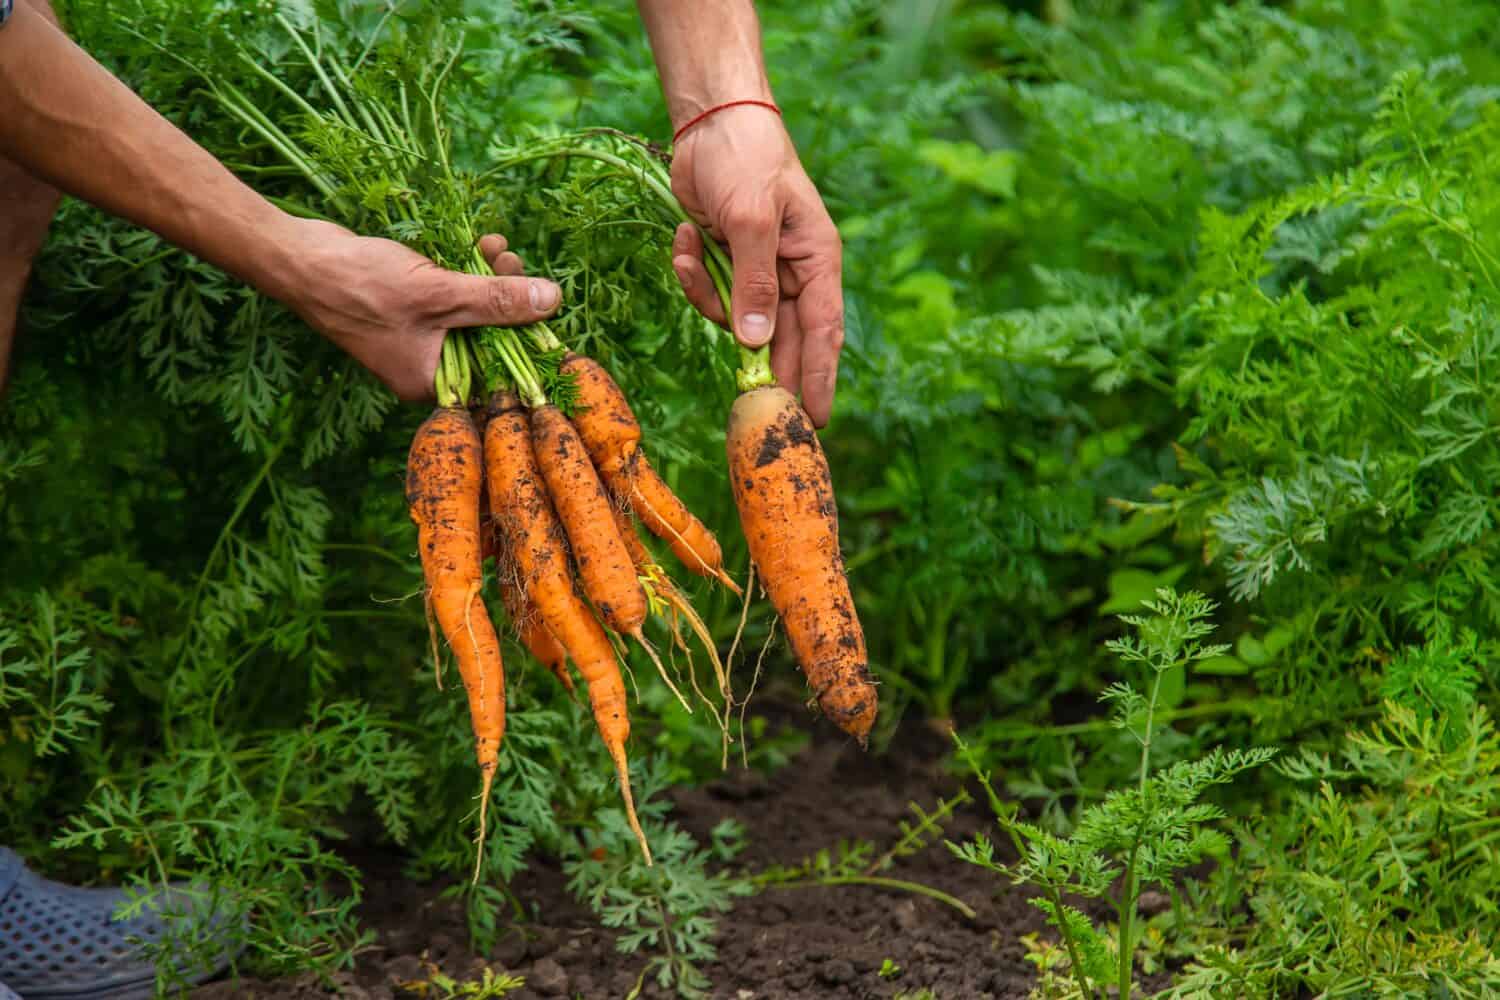 Carrots being harvested from a dense plot of land